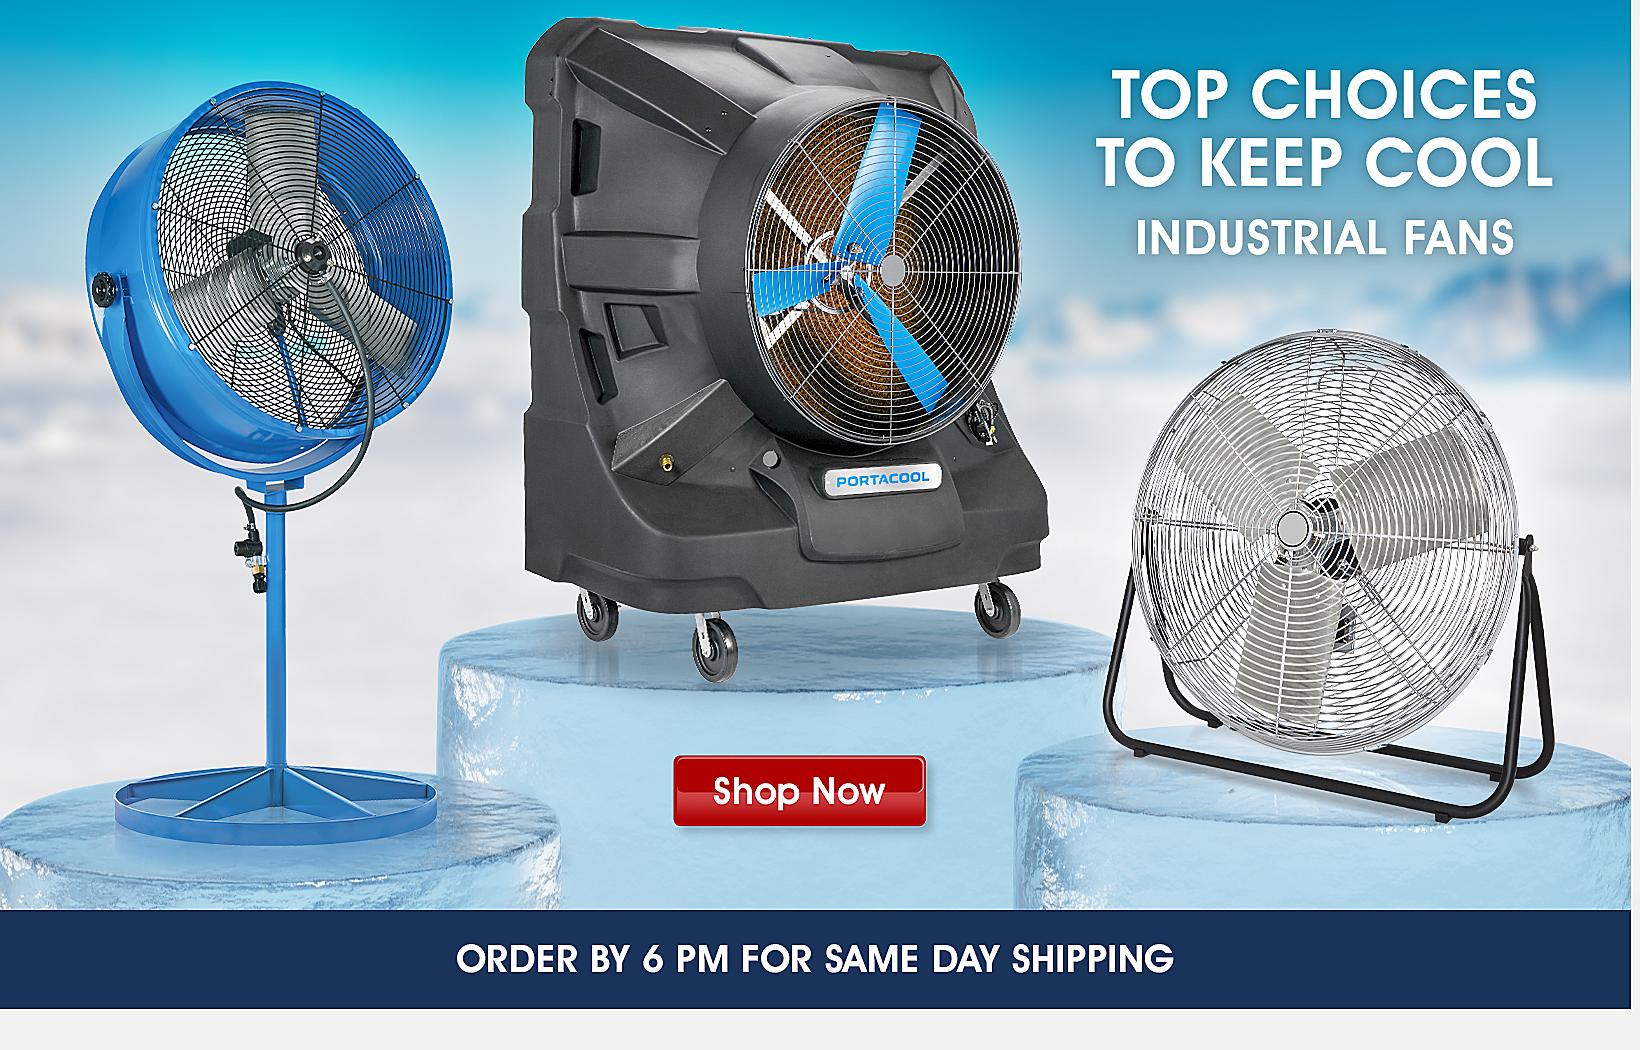 Top Choices to Keep Cool - Industrial Fans. Shop Now. ORDER BY 6 PM FOR SAME DAY SHIPPING